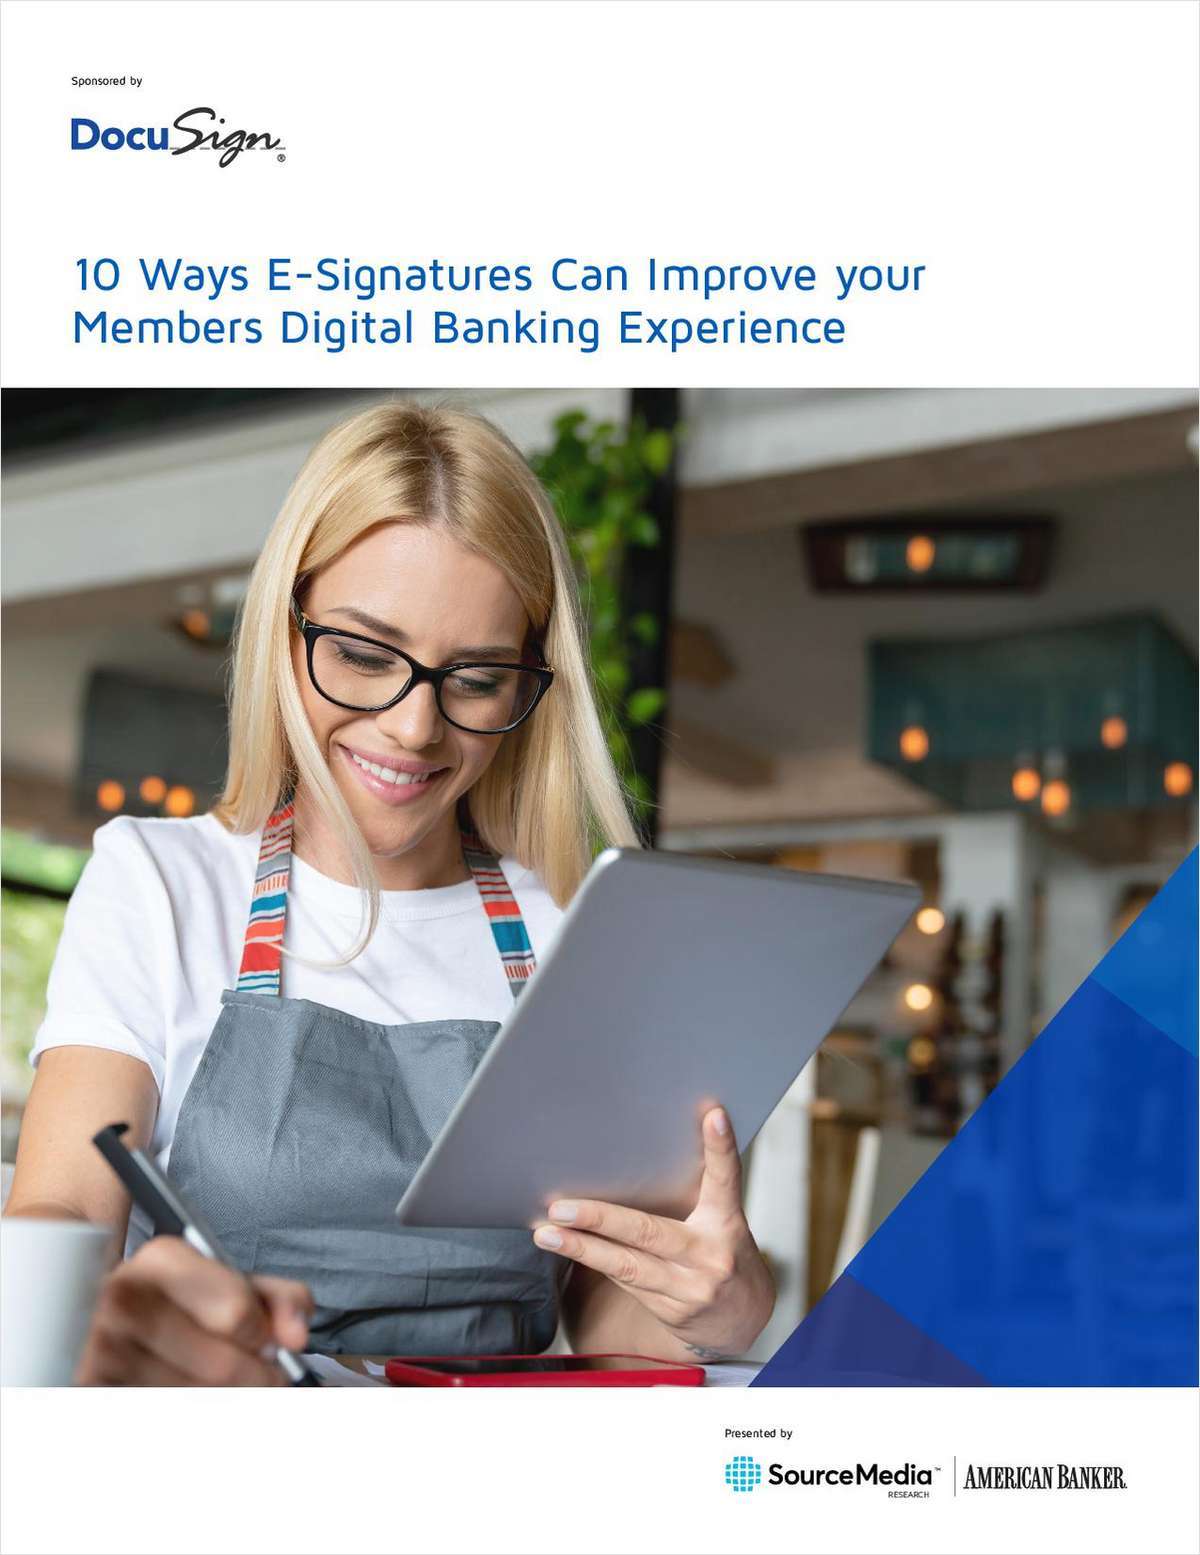 10 Ways E-Signatures Can Improve Your Members' Digital Banking Experience